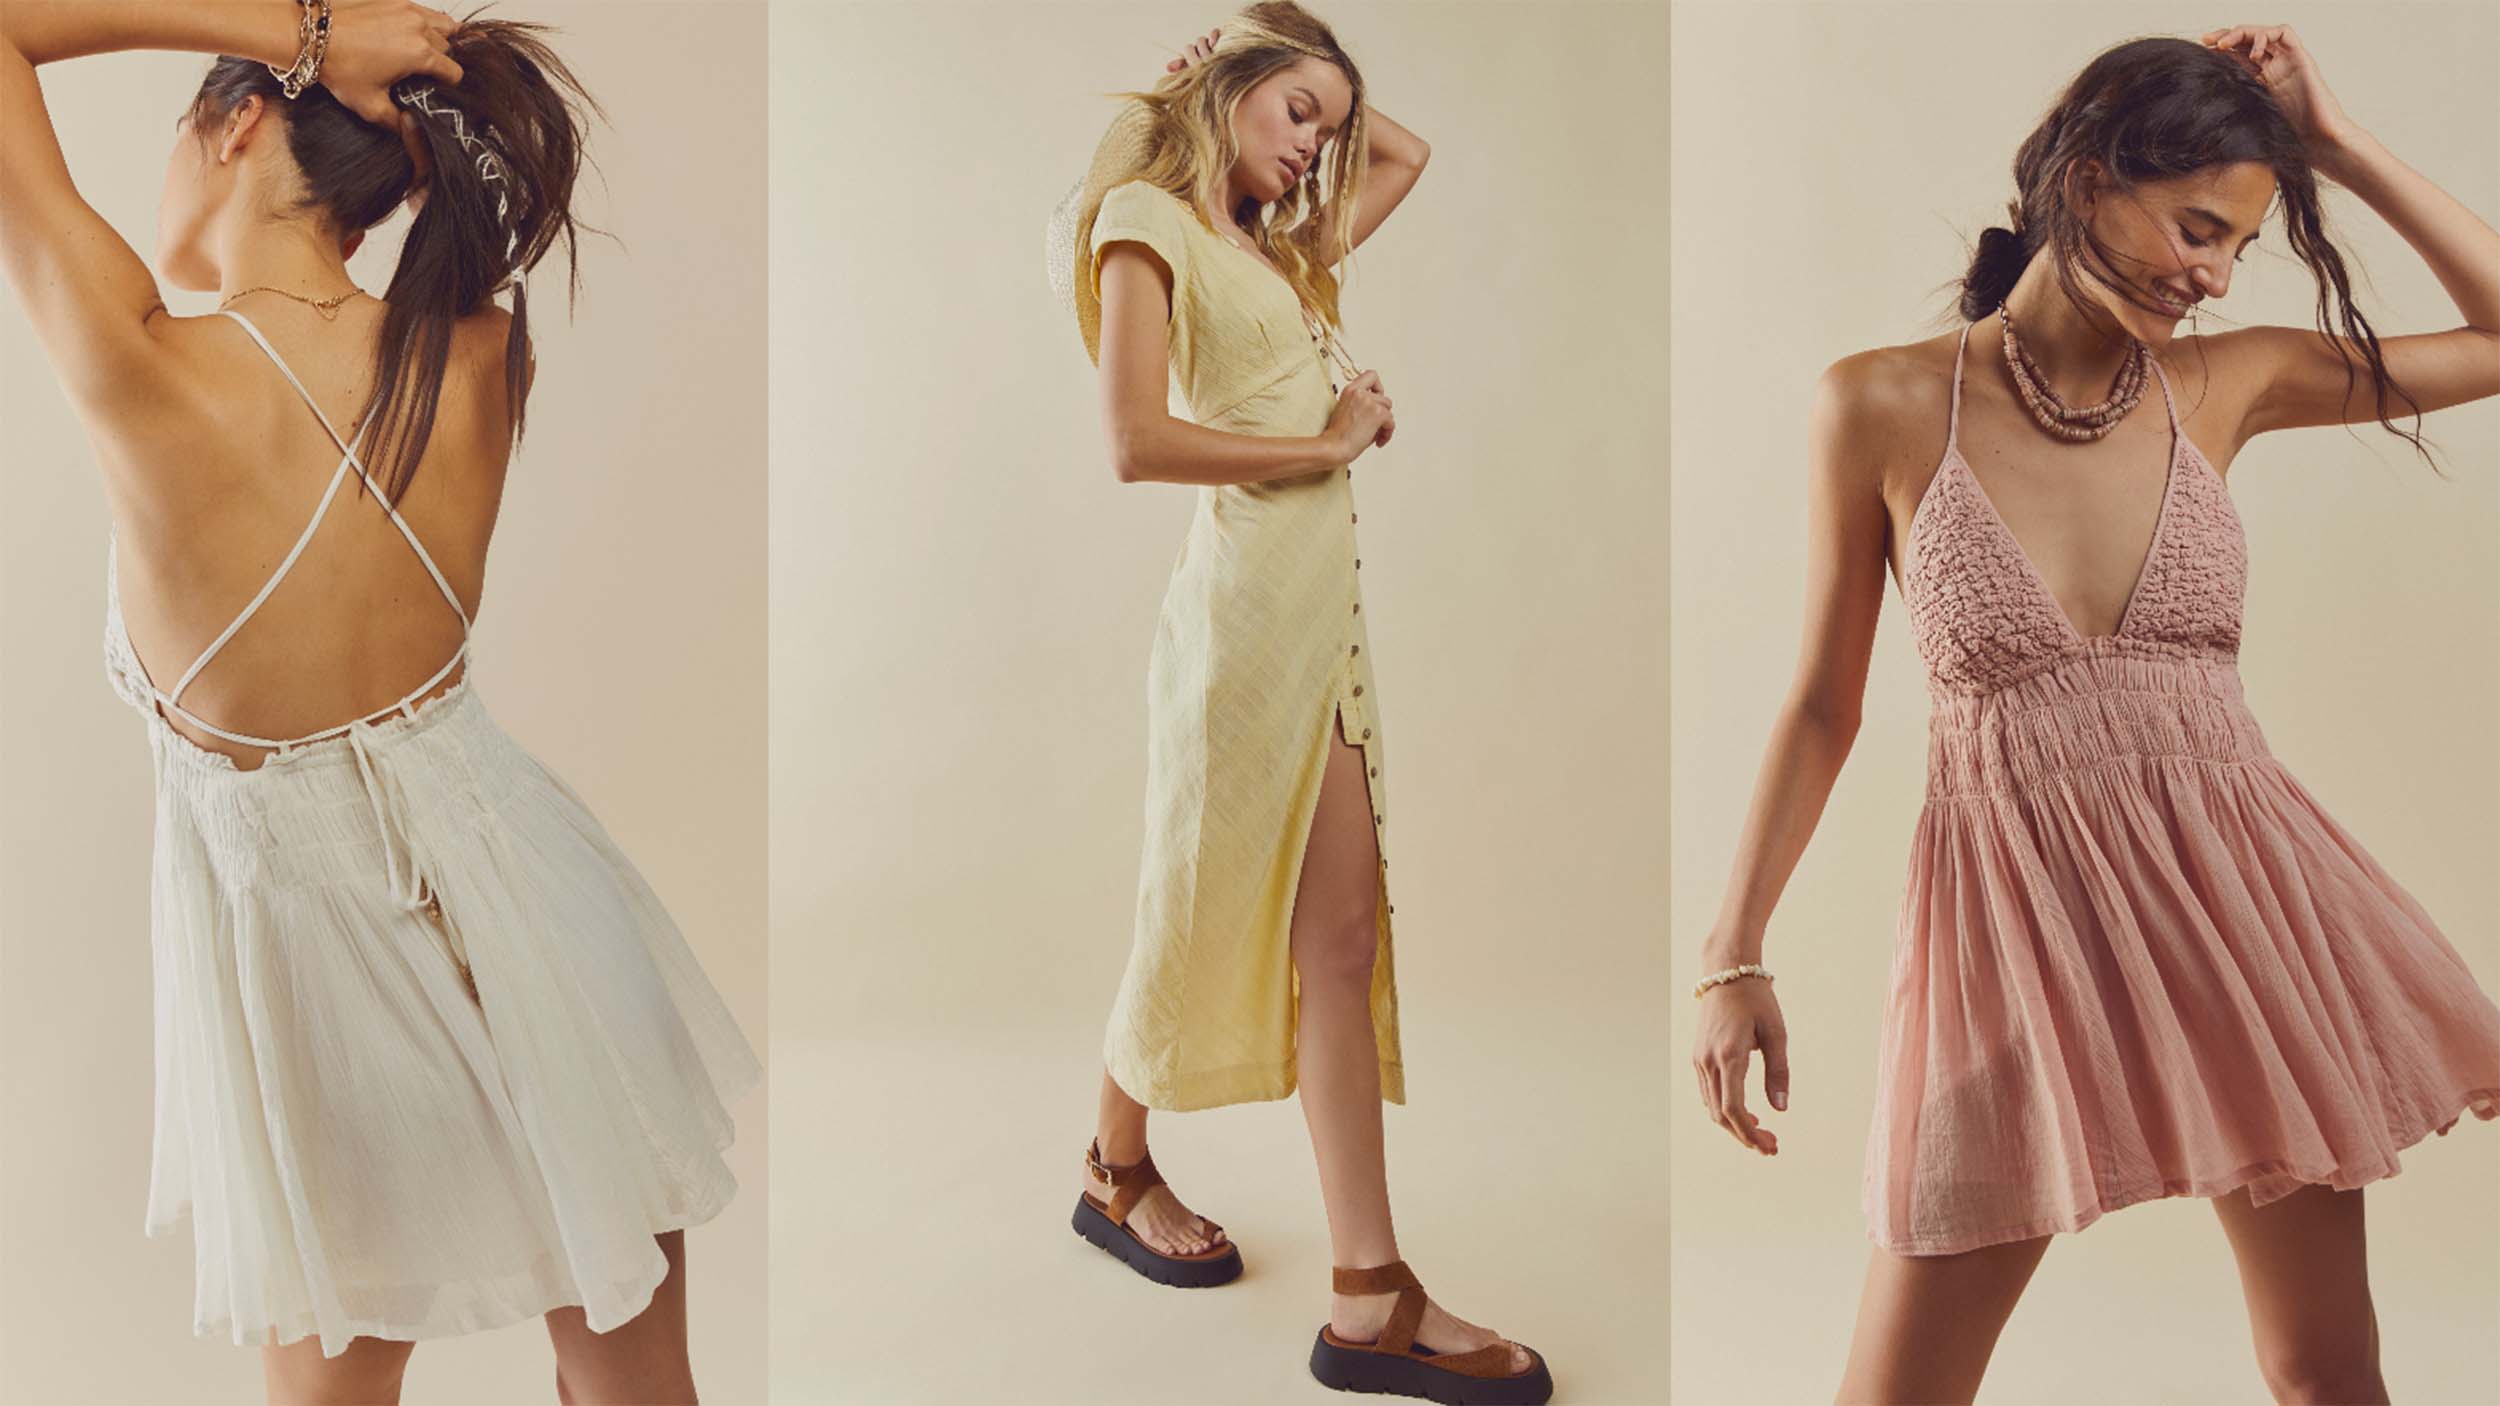 Free People's Beach & Summer dress collections brighten seasonal style